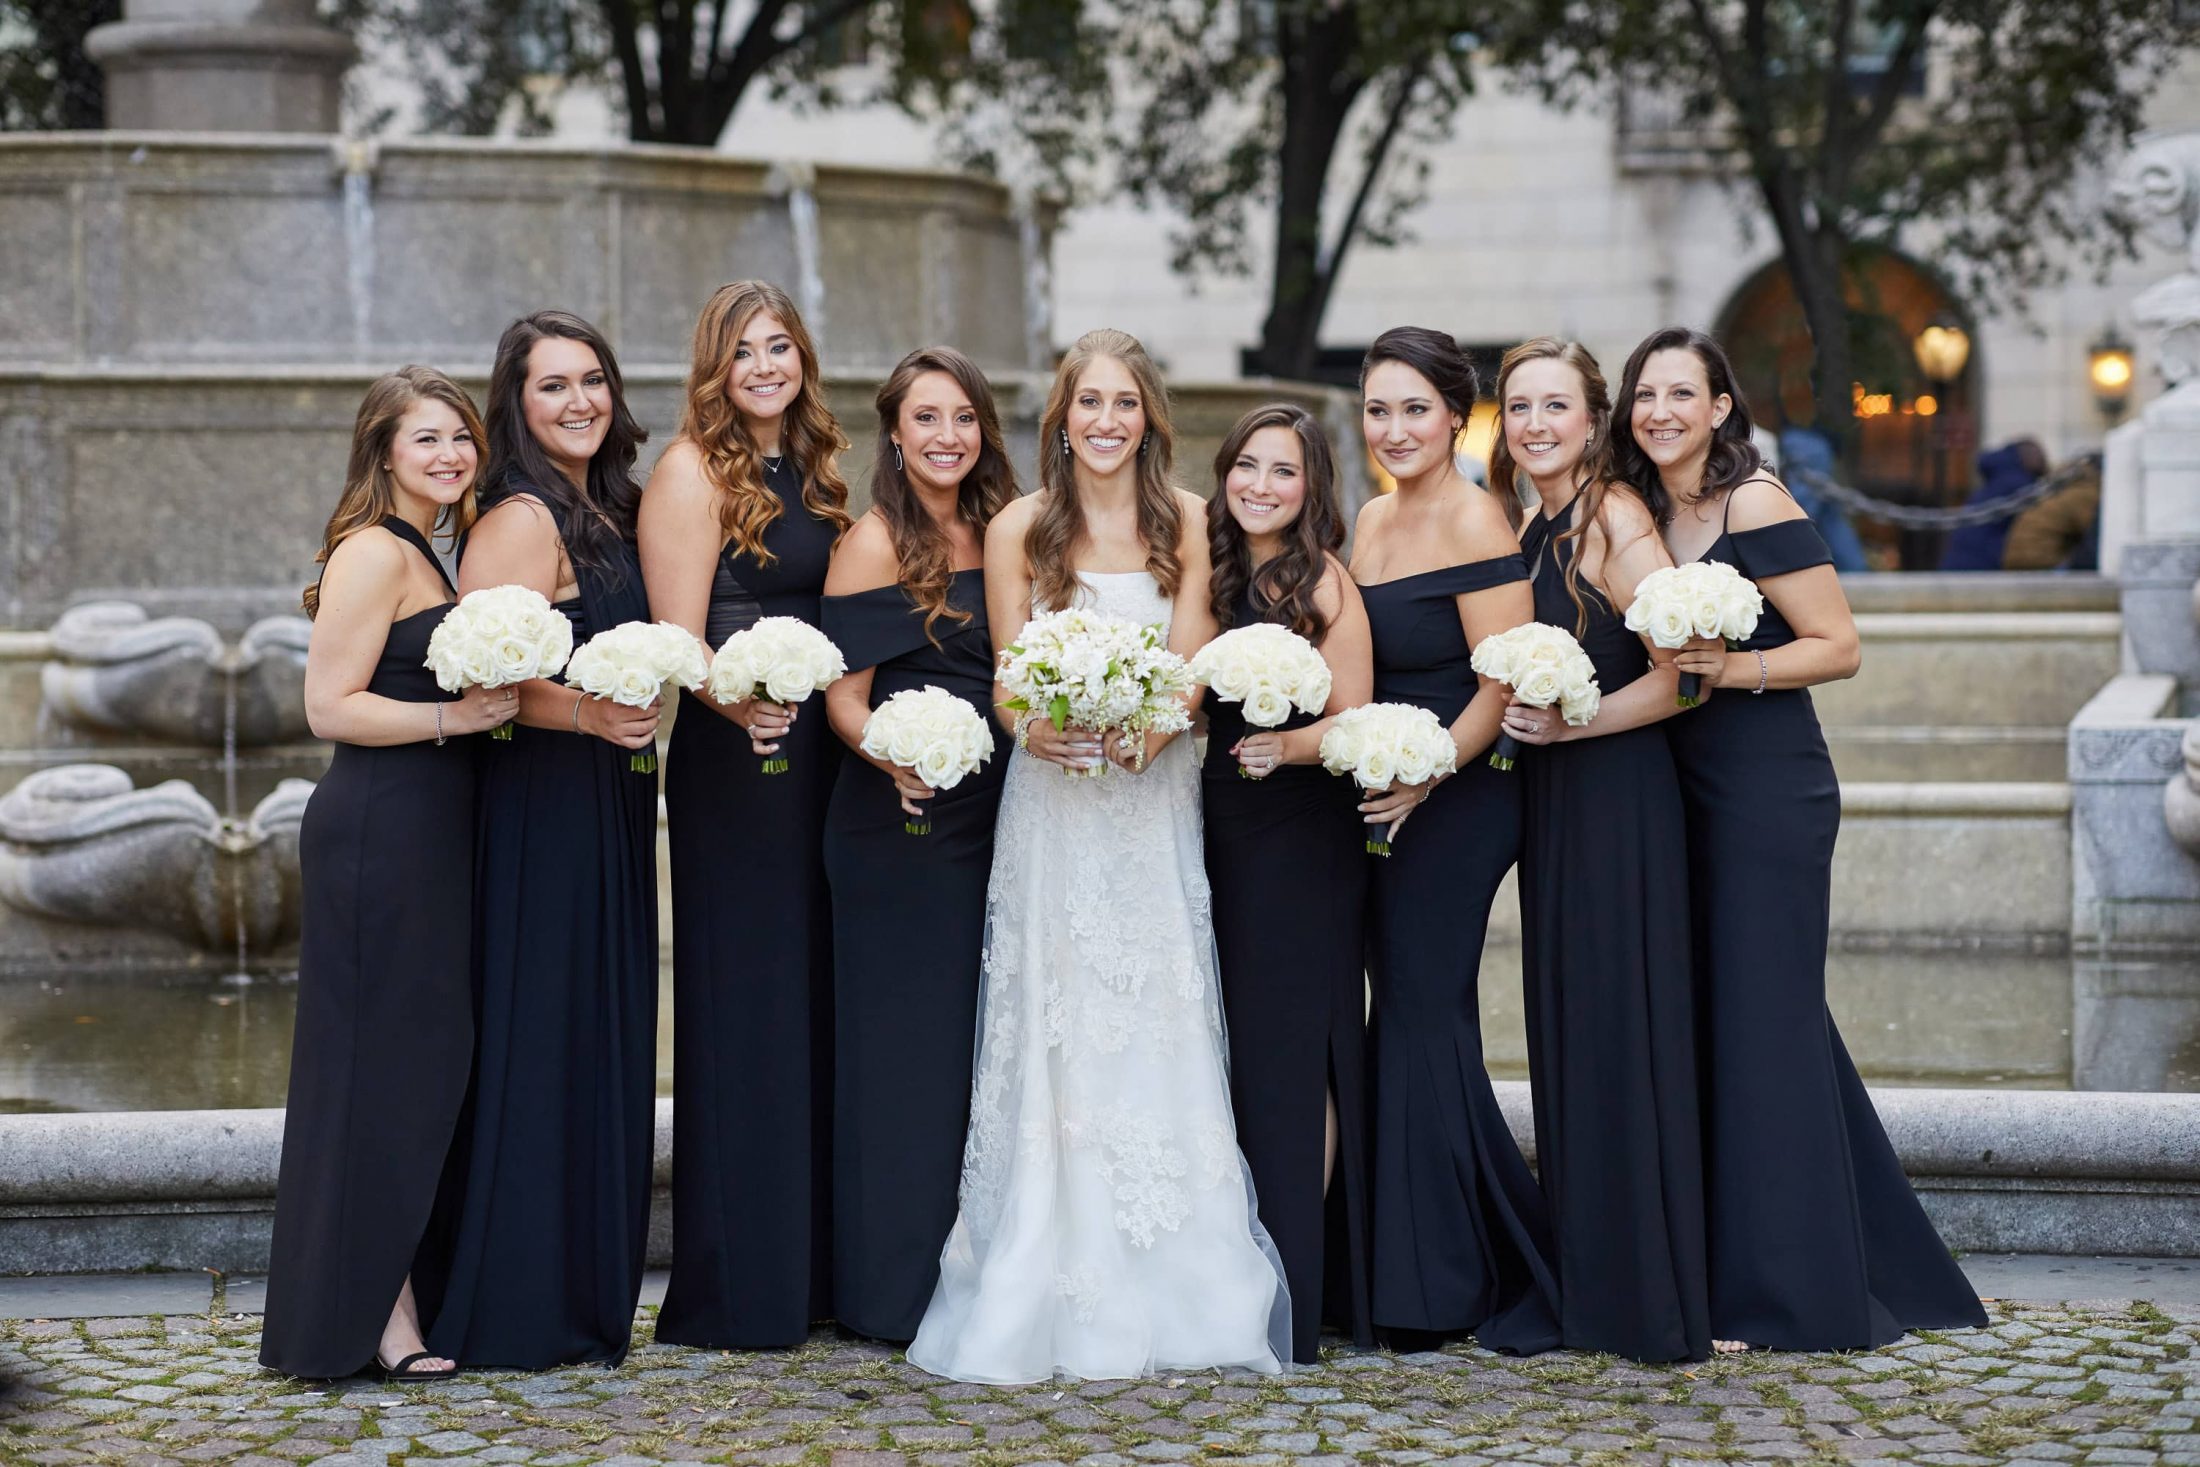 Bride with bridesmaids at this classic autumn wedding at The Plaza in NYC | Photo by Christian Oth Studio